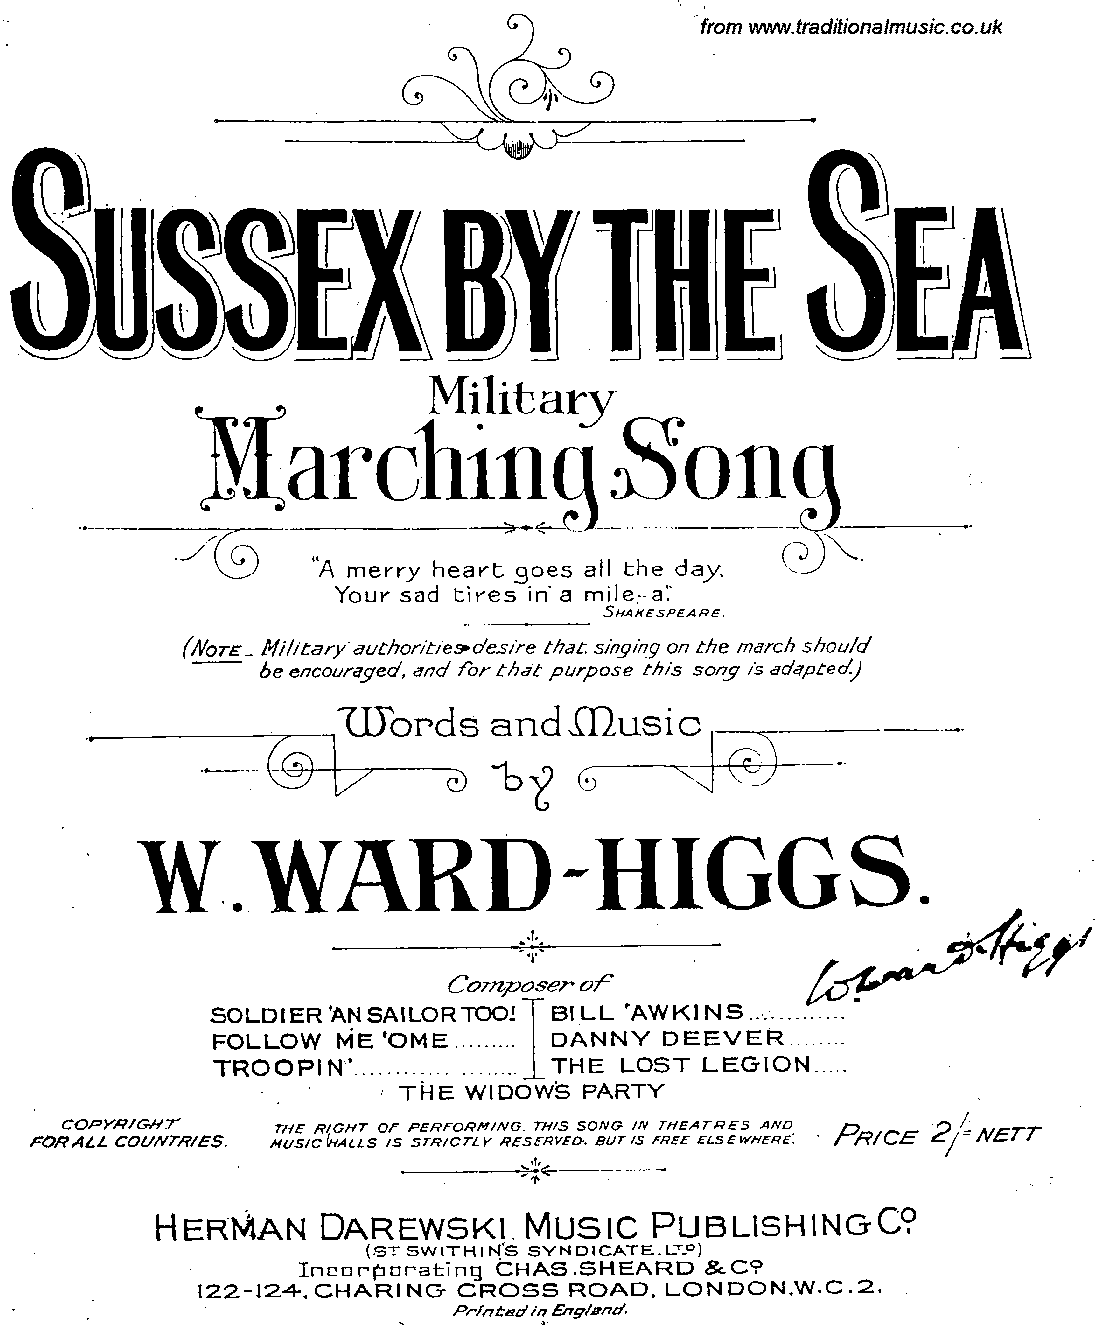 Sussex By The Sea, Complete Score, page 9 of 11